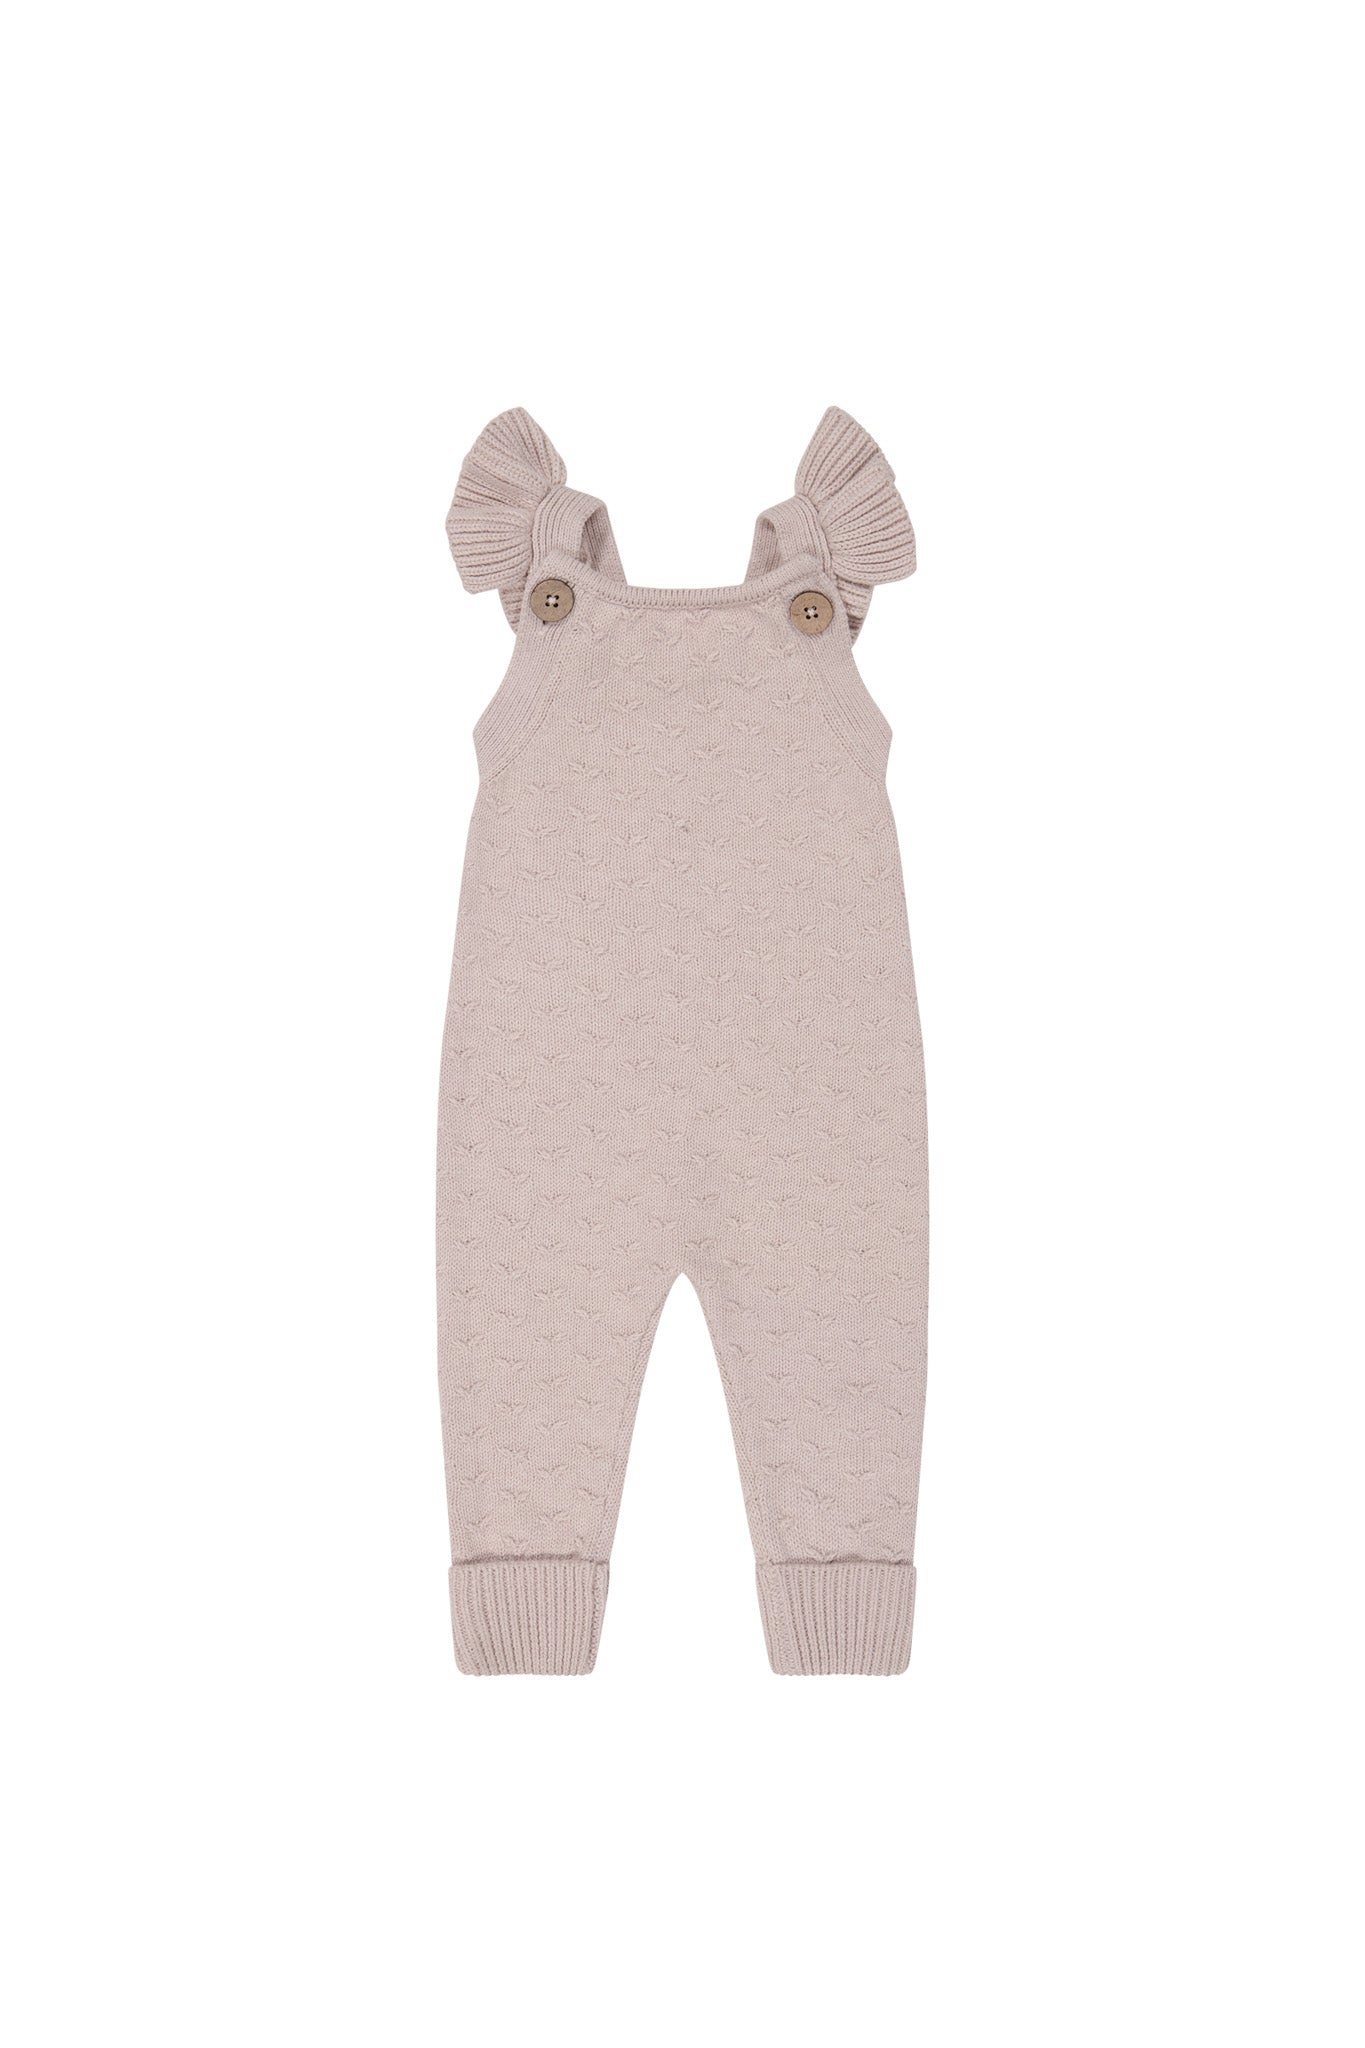 JAMIE KAY Mia Knitted Onepiece,Ballet Pink Lys Rosa